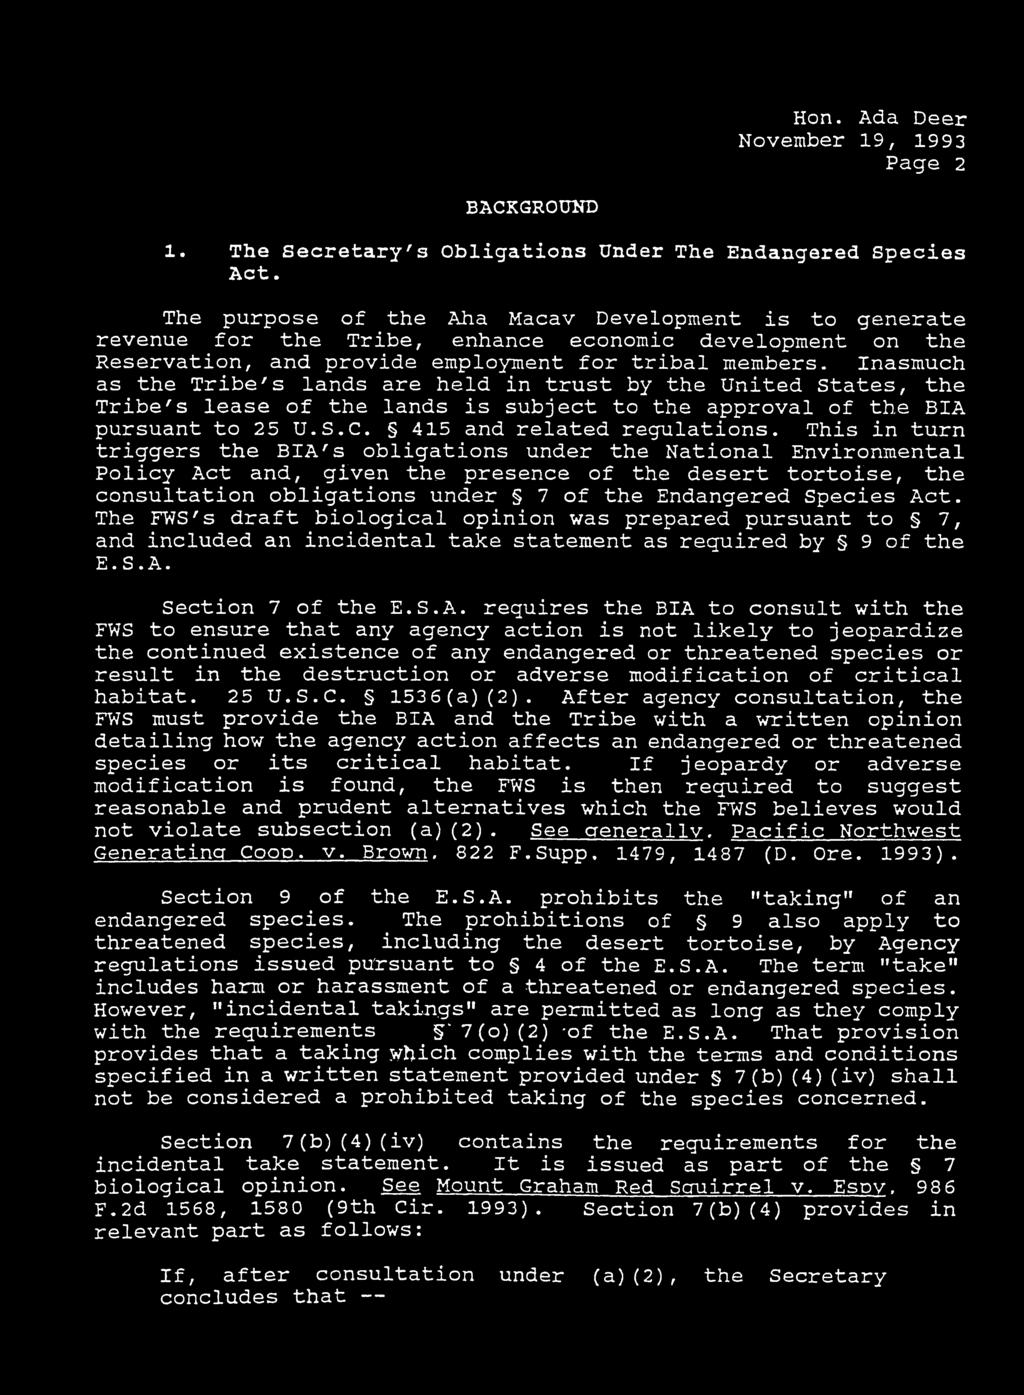 Hon. Ada Deer November 19, 1993 Page 2 BACKGROUND 1. The Secretary's Obligations Under The Endangered Species Act.